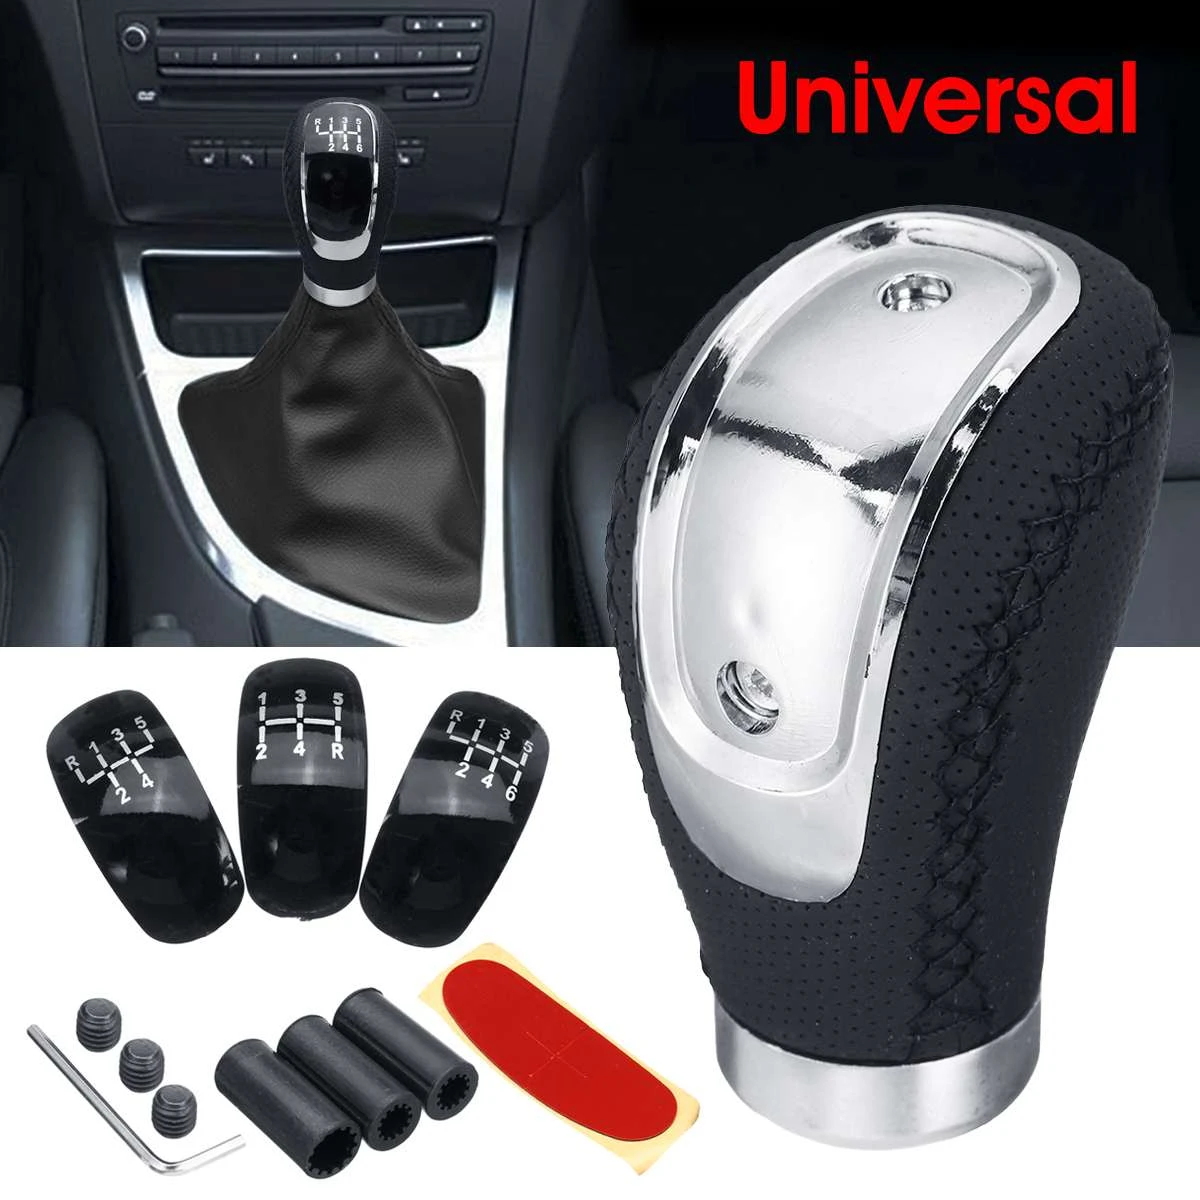 Universal Car PU Leather Gear Shift Knob Manual Transmission with Gear Knob Cap Cover 5/6 Speed Shifter Lever